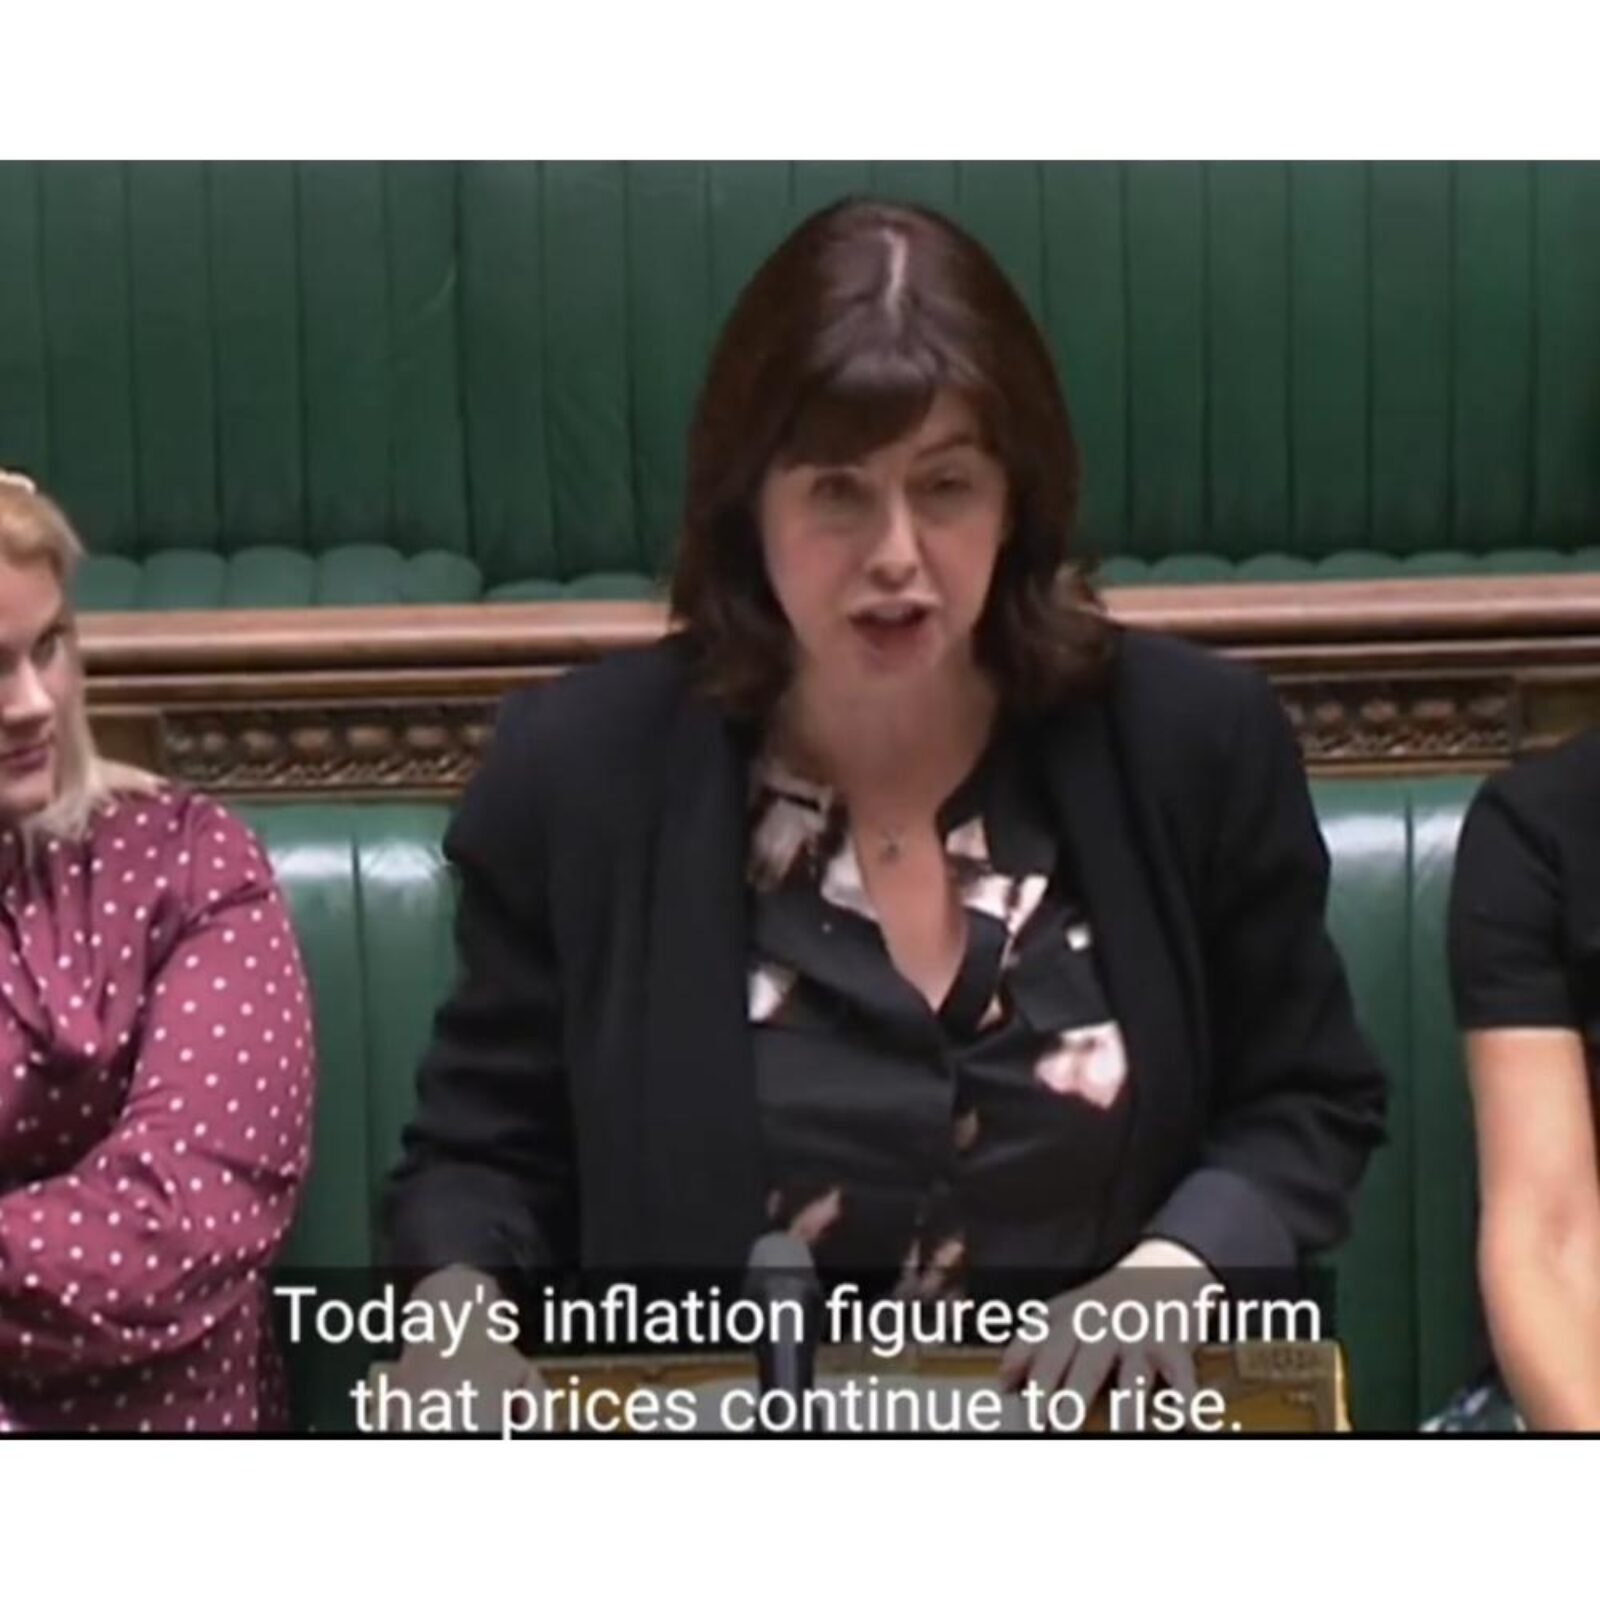 Lucy Powell raising concerns regarding rising prices for internet and broadband